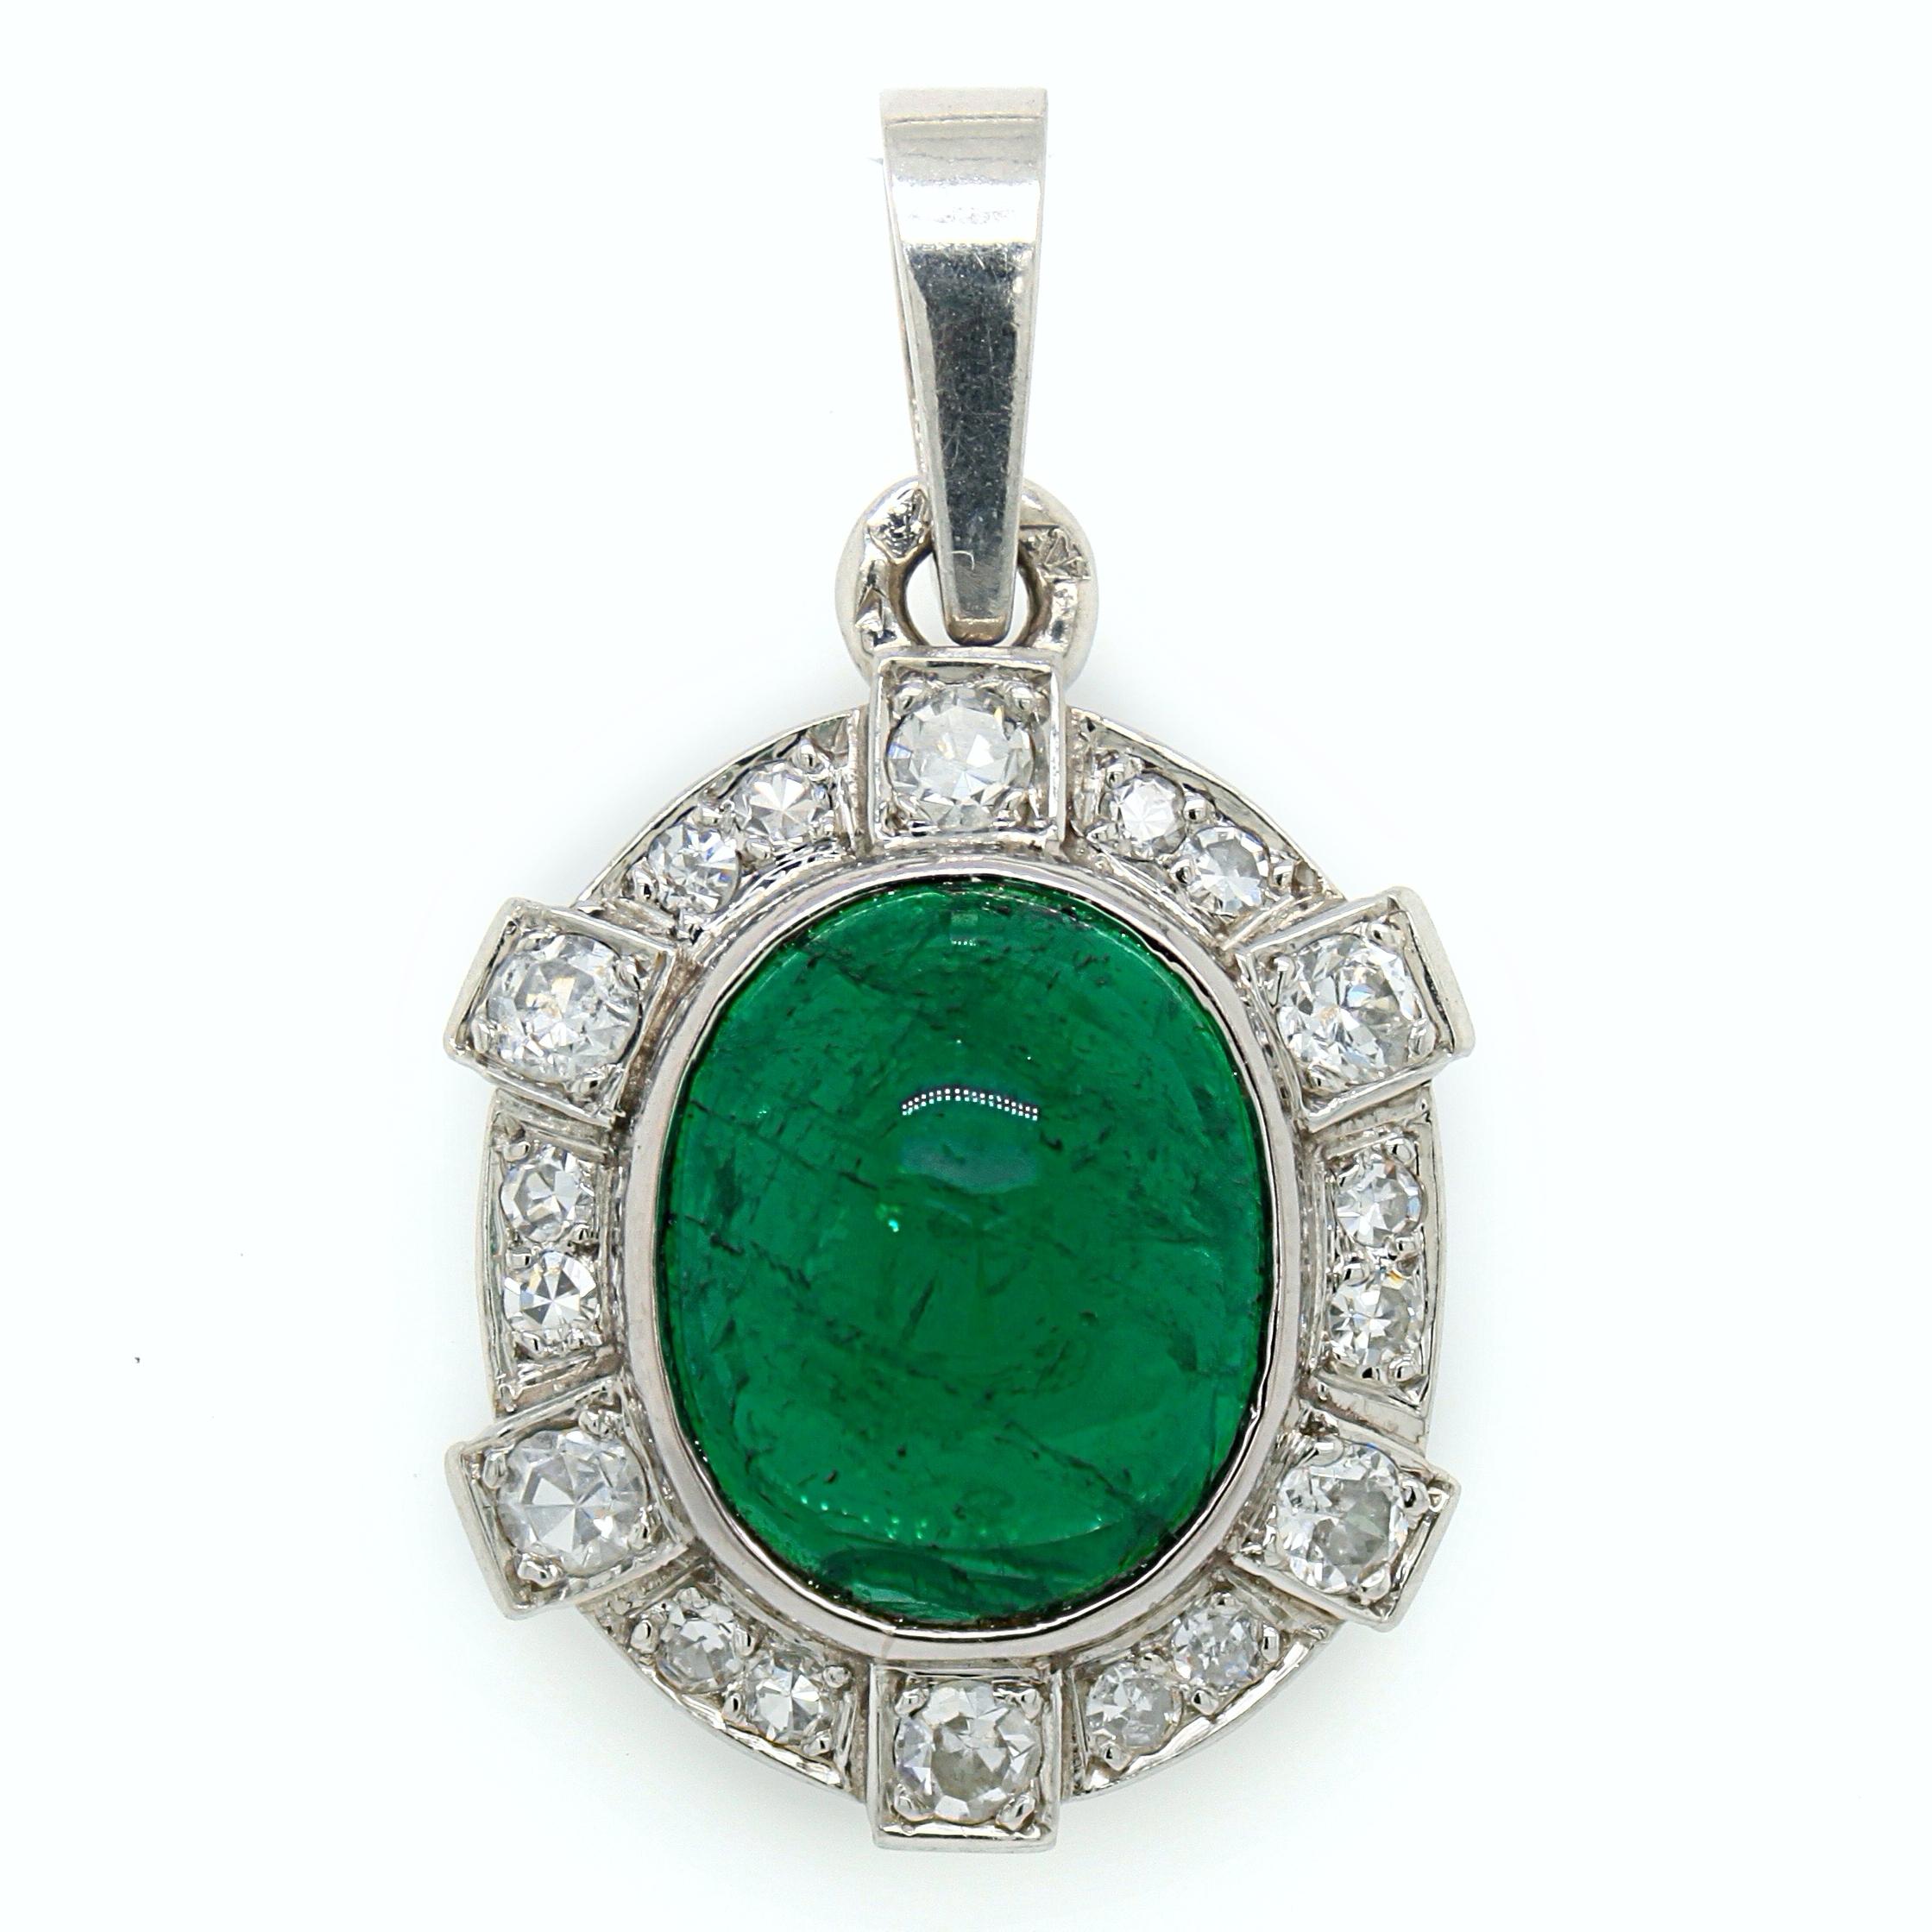 An Art Deco emerald and diamond pendant in platinum, France, ca. 1920s. The emerald cabochon weighs approximately 4.8 carats and is of Columbian origin, accompanied by a short gemological report. It has a vibrant green colour and a very lively